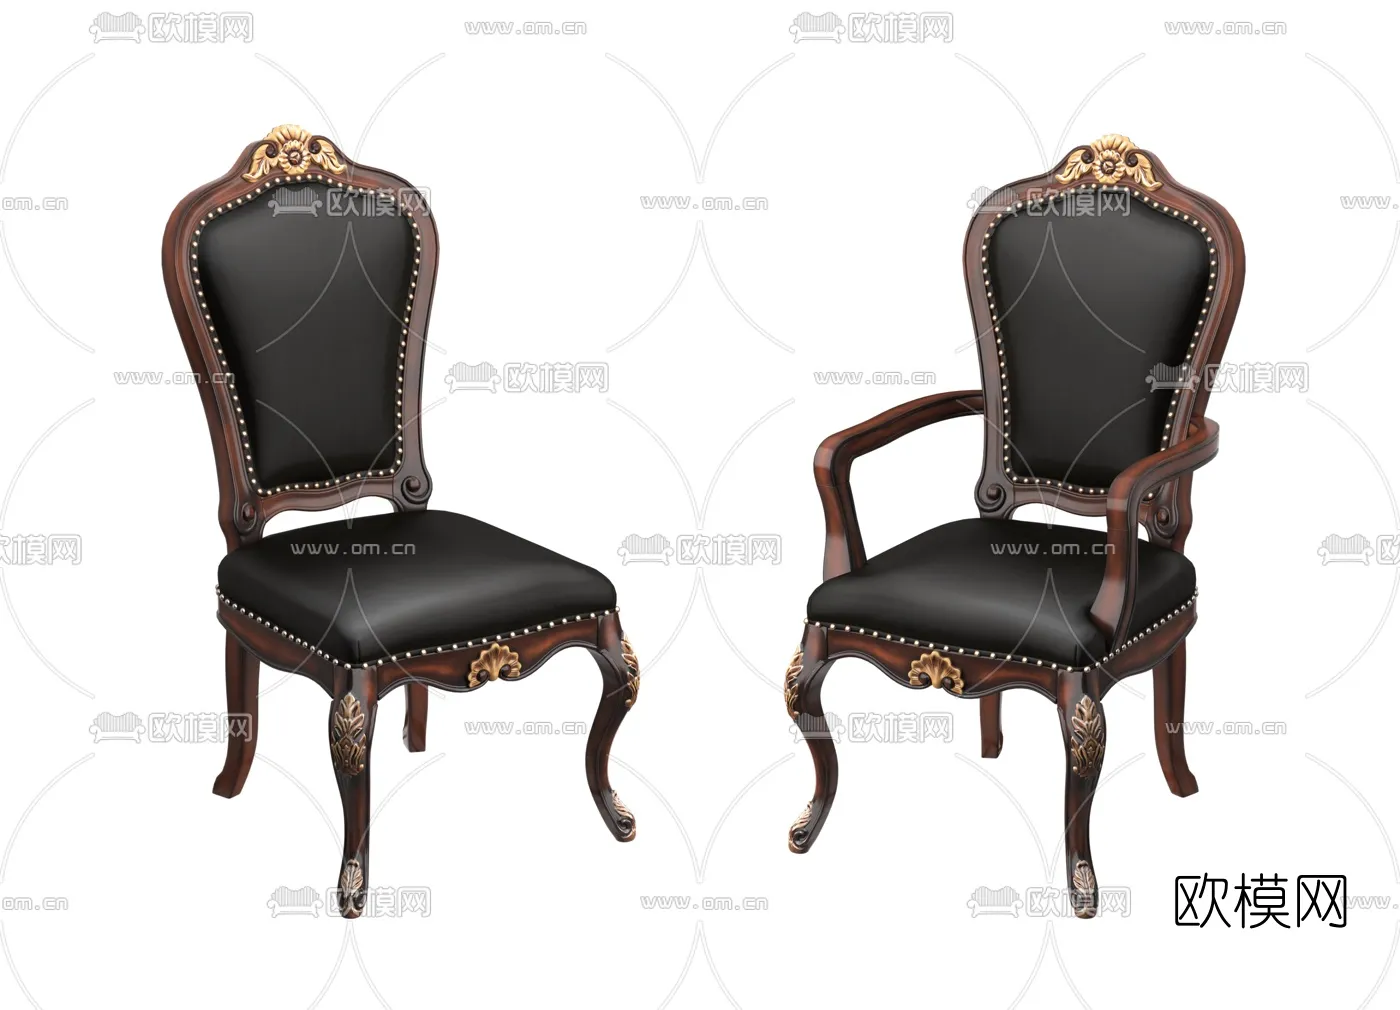 CLASSIC – DINING CHAIR 3DMODELS – 001